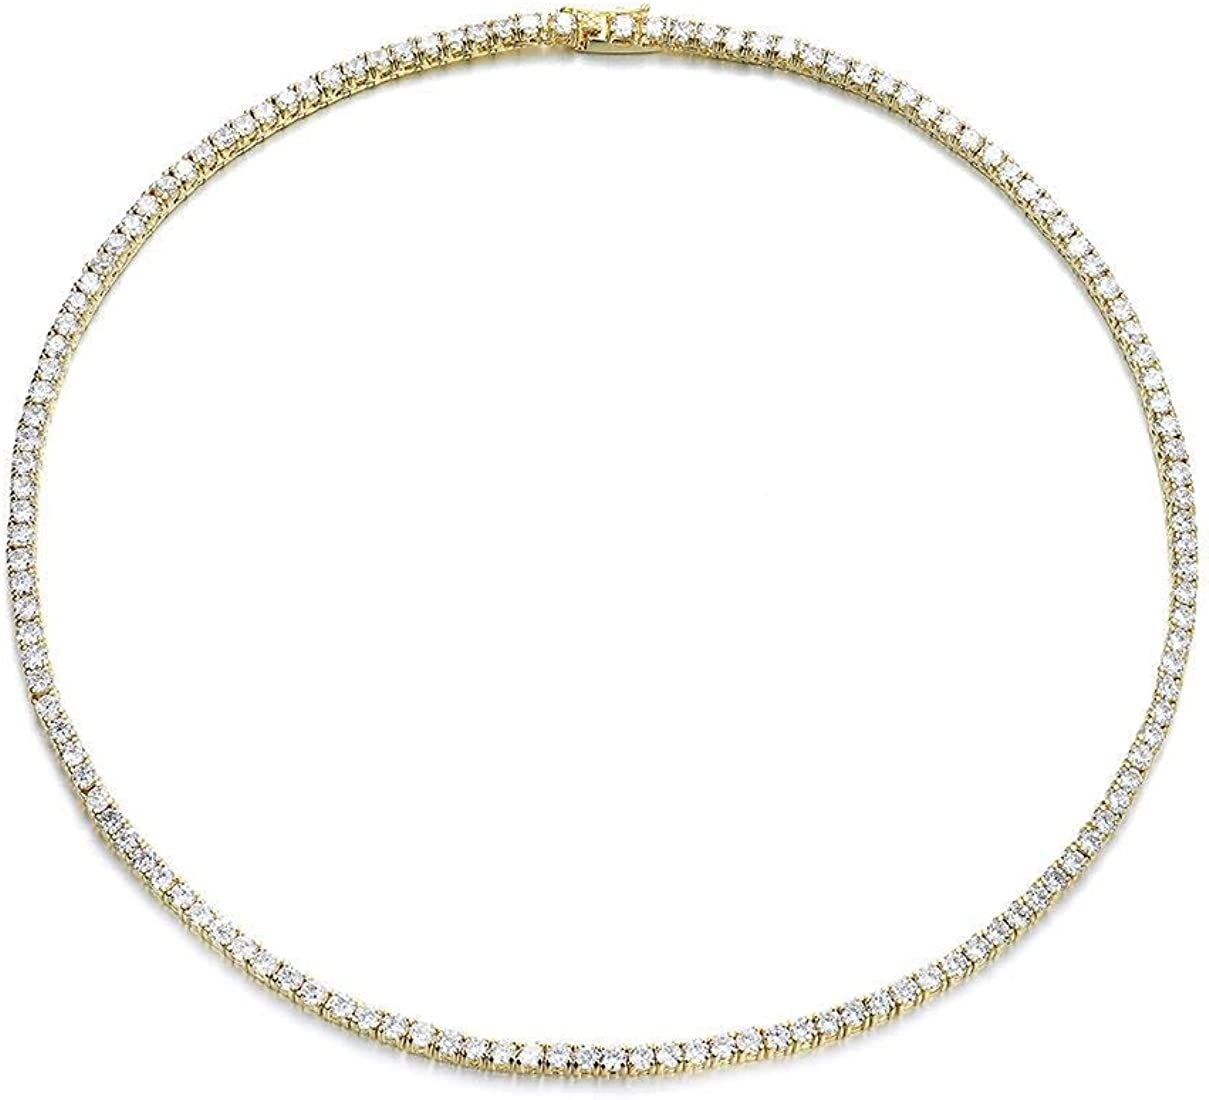 NYC Sterling Women's Magnificent 3mm Round Cubic Zirconia Tennis Necklace | Amazon (US)